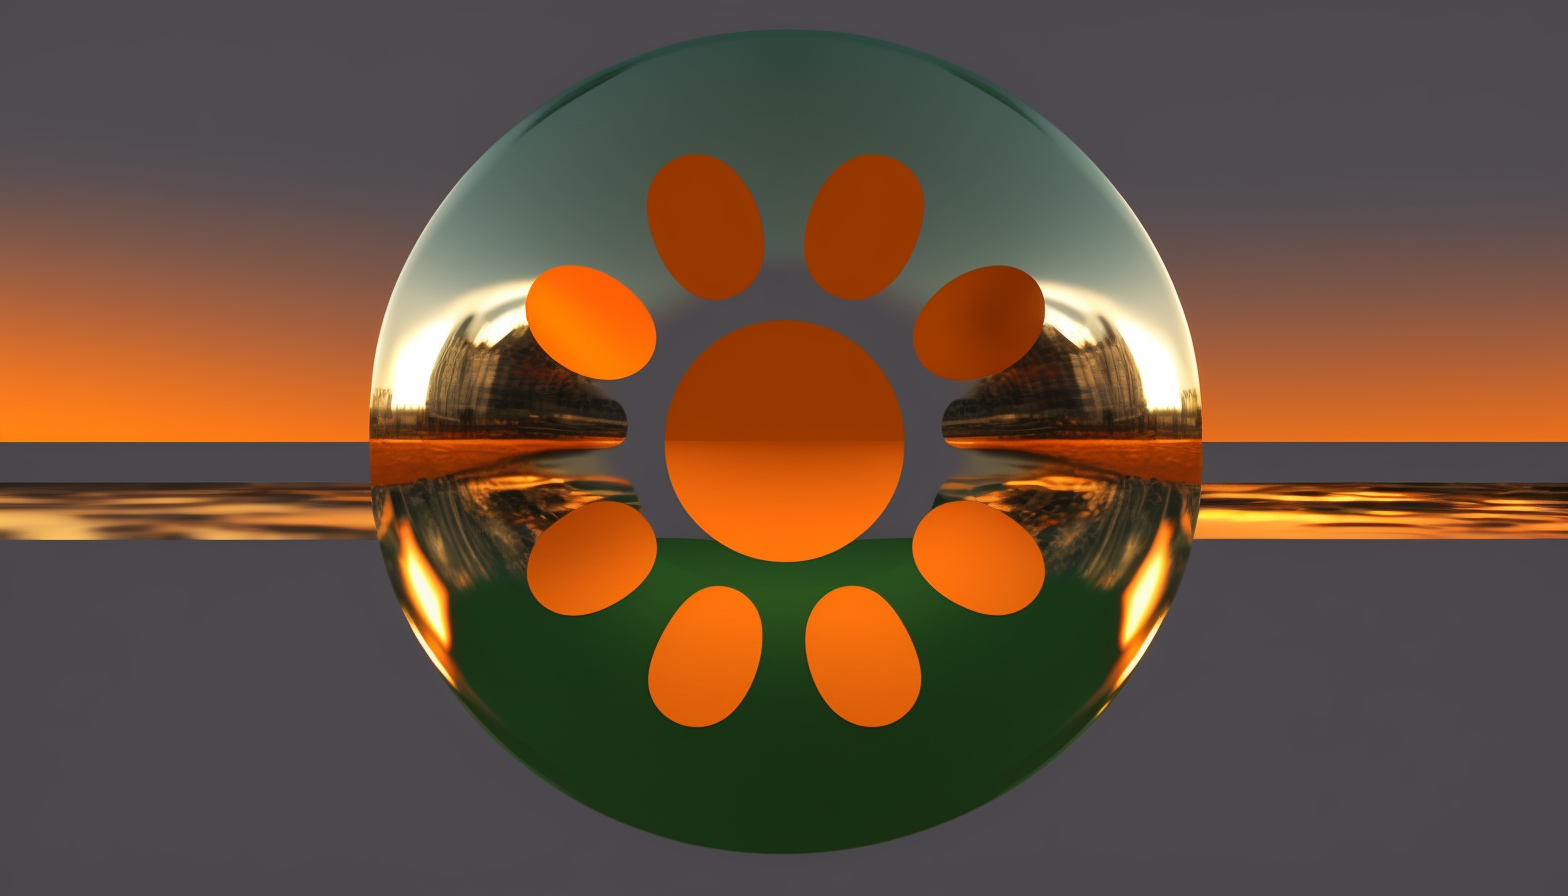 A stylised version of the Kentico logo in front of a sunset